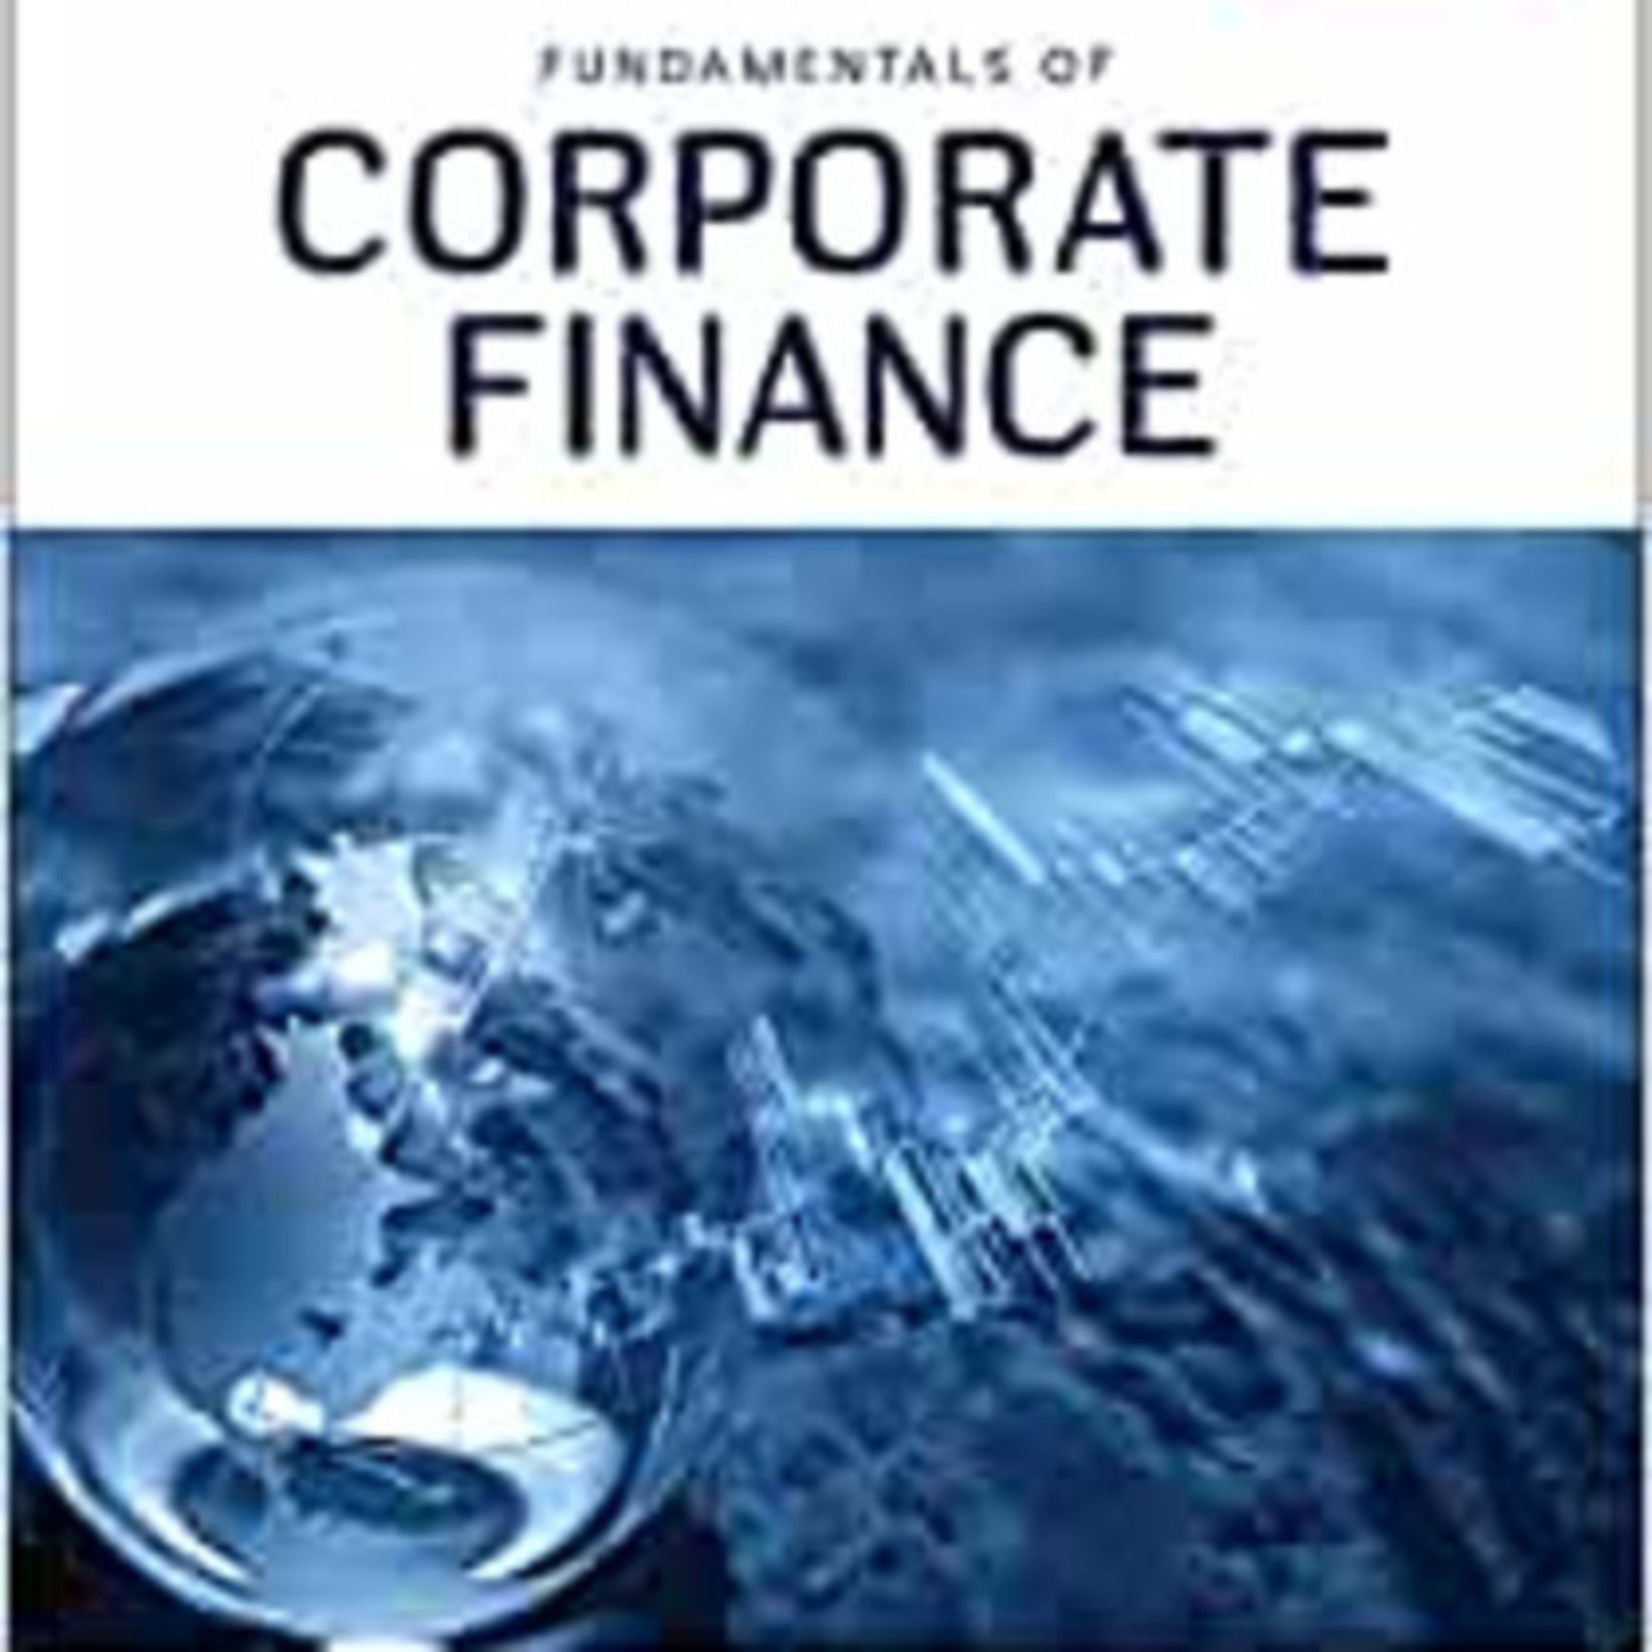 eBook Fundamentals of Corporate Finance 7th Canadian Ed. - Connect w/SmartBook (360 Day)